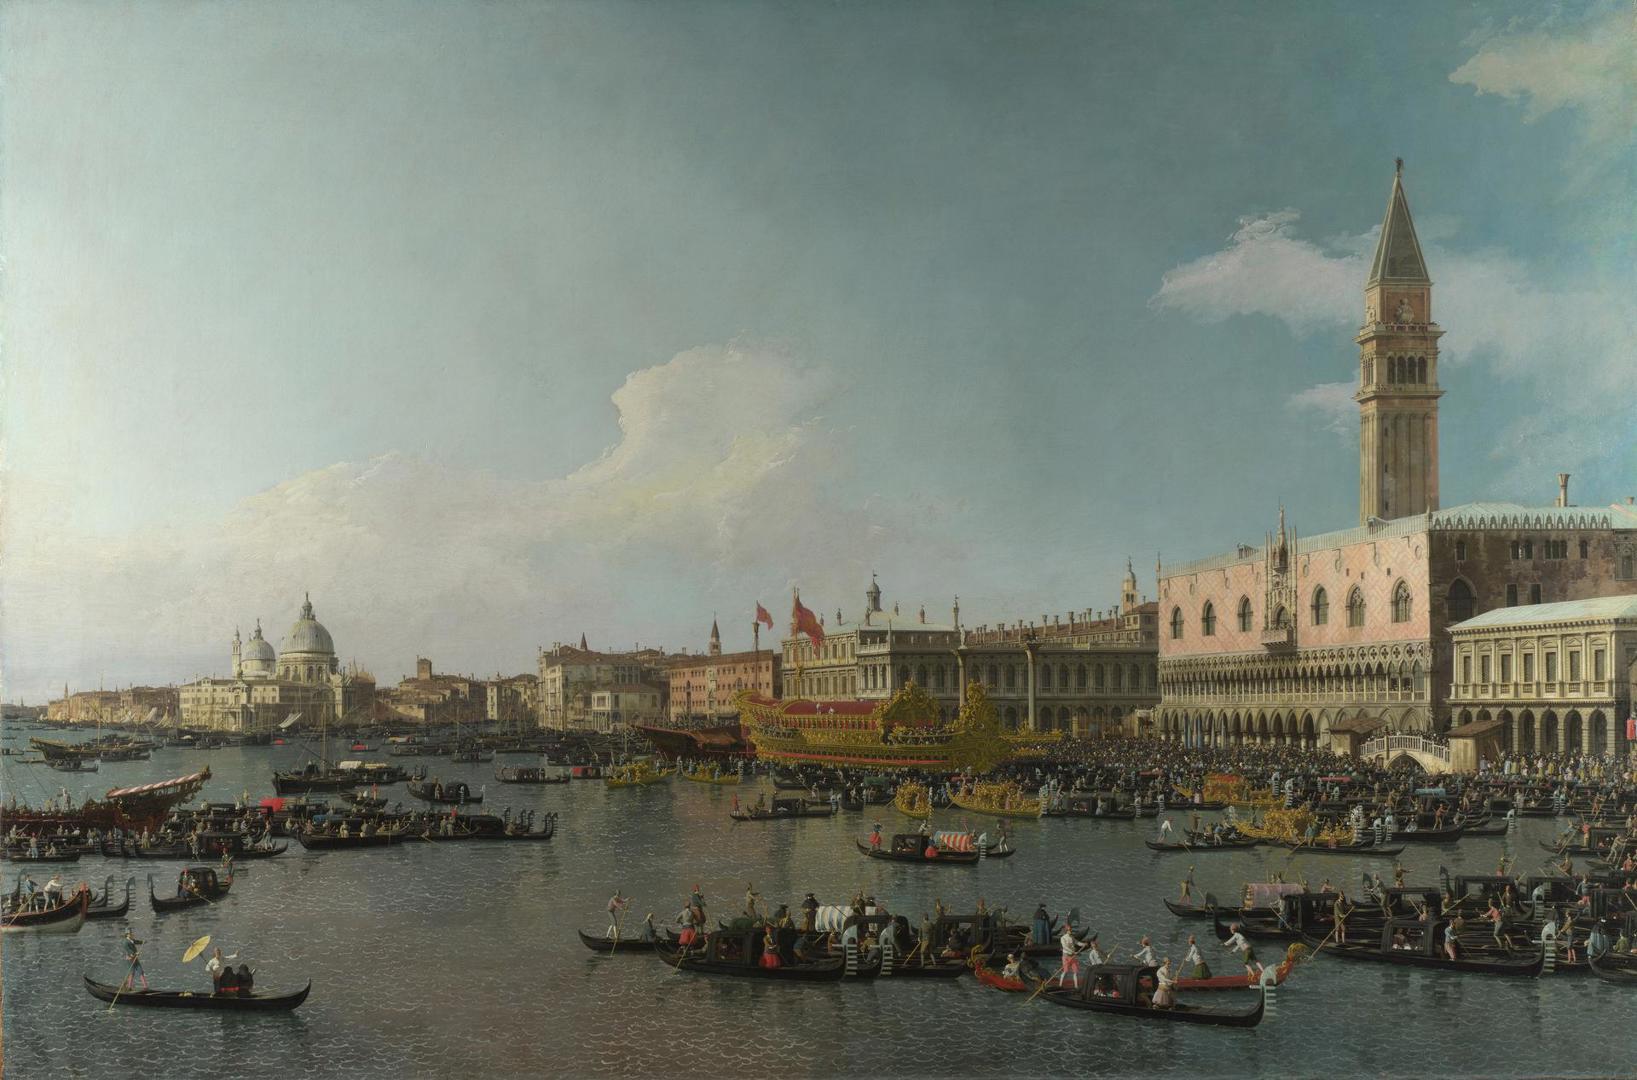 Venice: The Basin of San Marco on Ascension Day by Canaletto